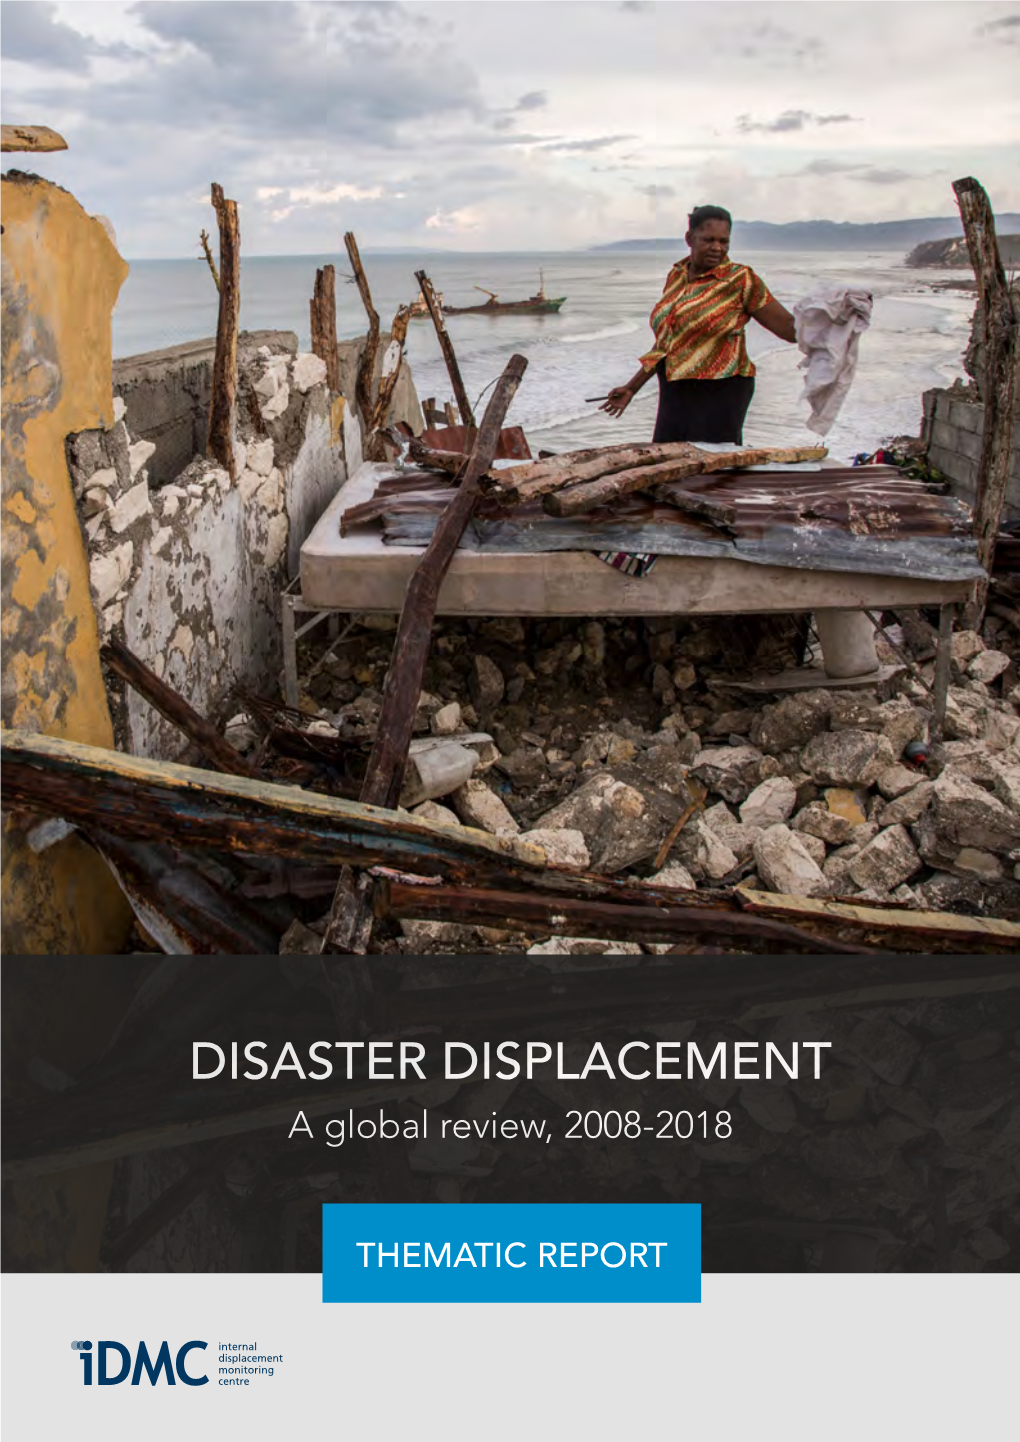 Disaster Displacement, a Global Review 2008